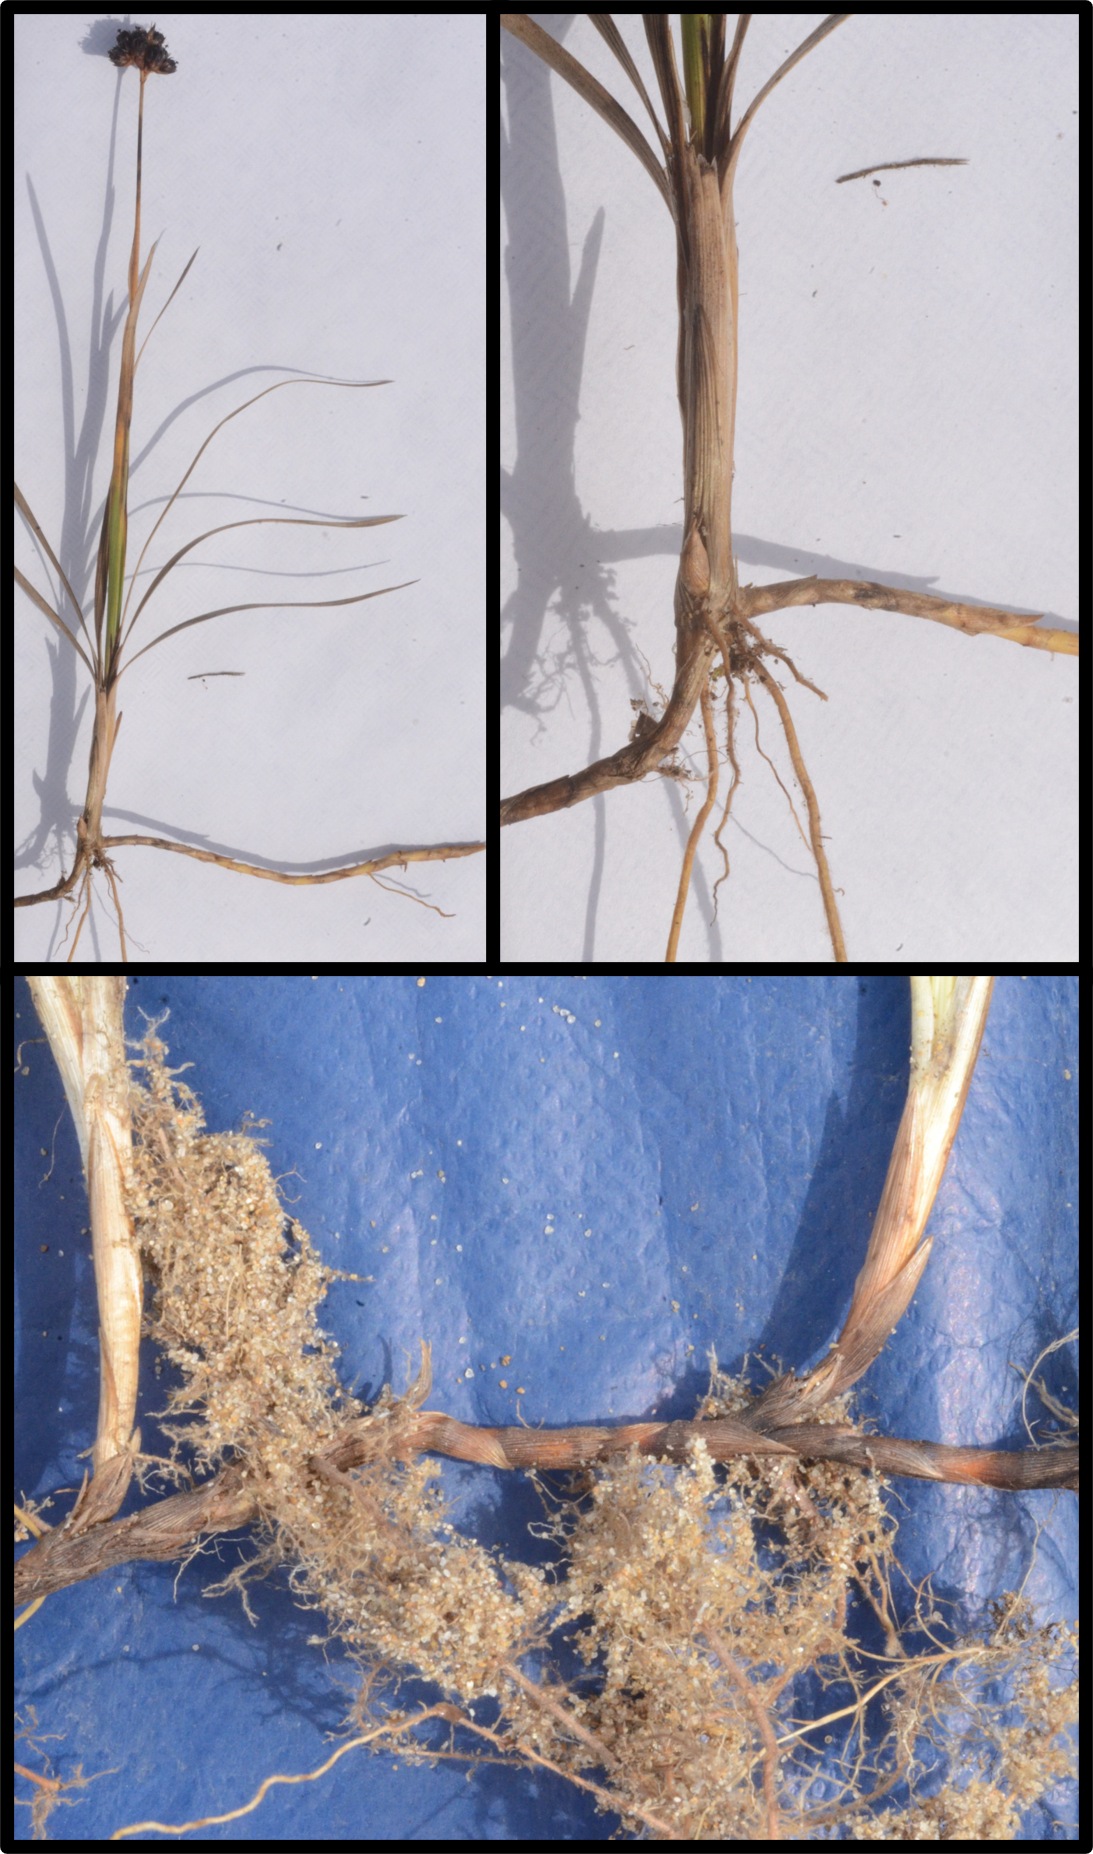 Juncus falcatus ssp. sitchensis whole plant (top left) and junction of shoot, rhizome, and roots (top right and bottom).